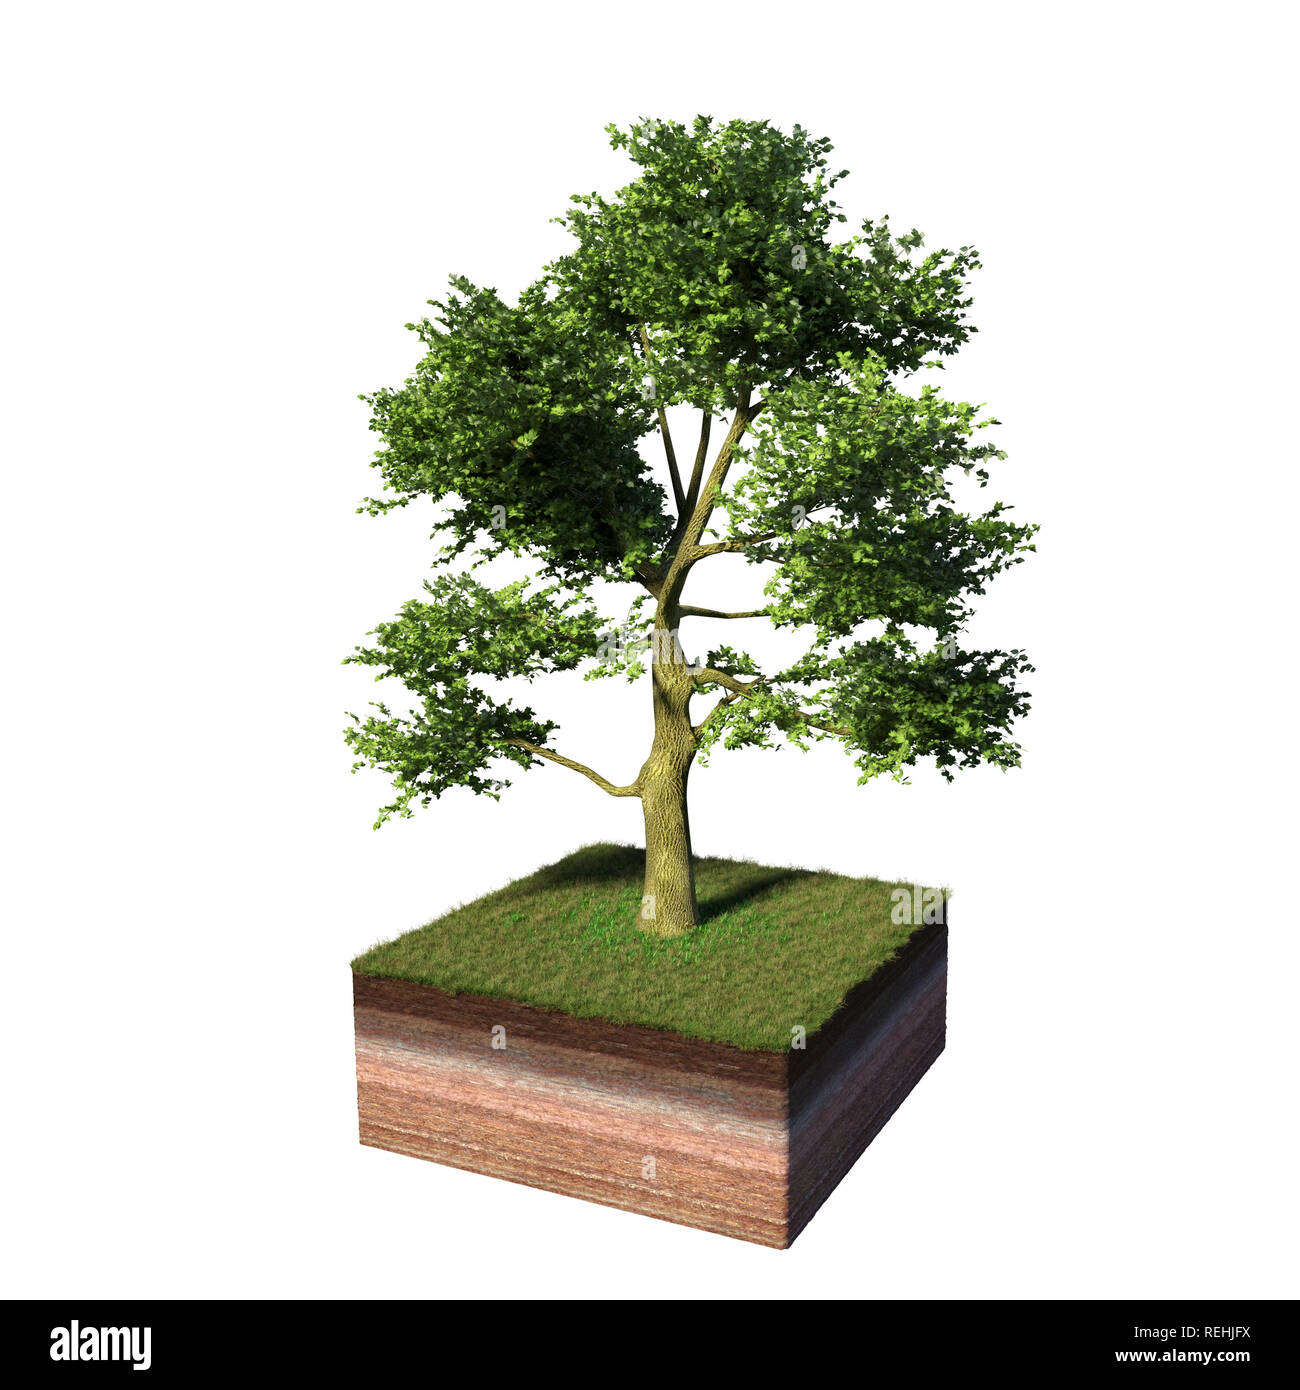 model of a cross section of ground with white ash tree tree and grass on the surface (3d illustration, isolated on white background) Stock Photo